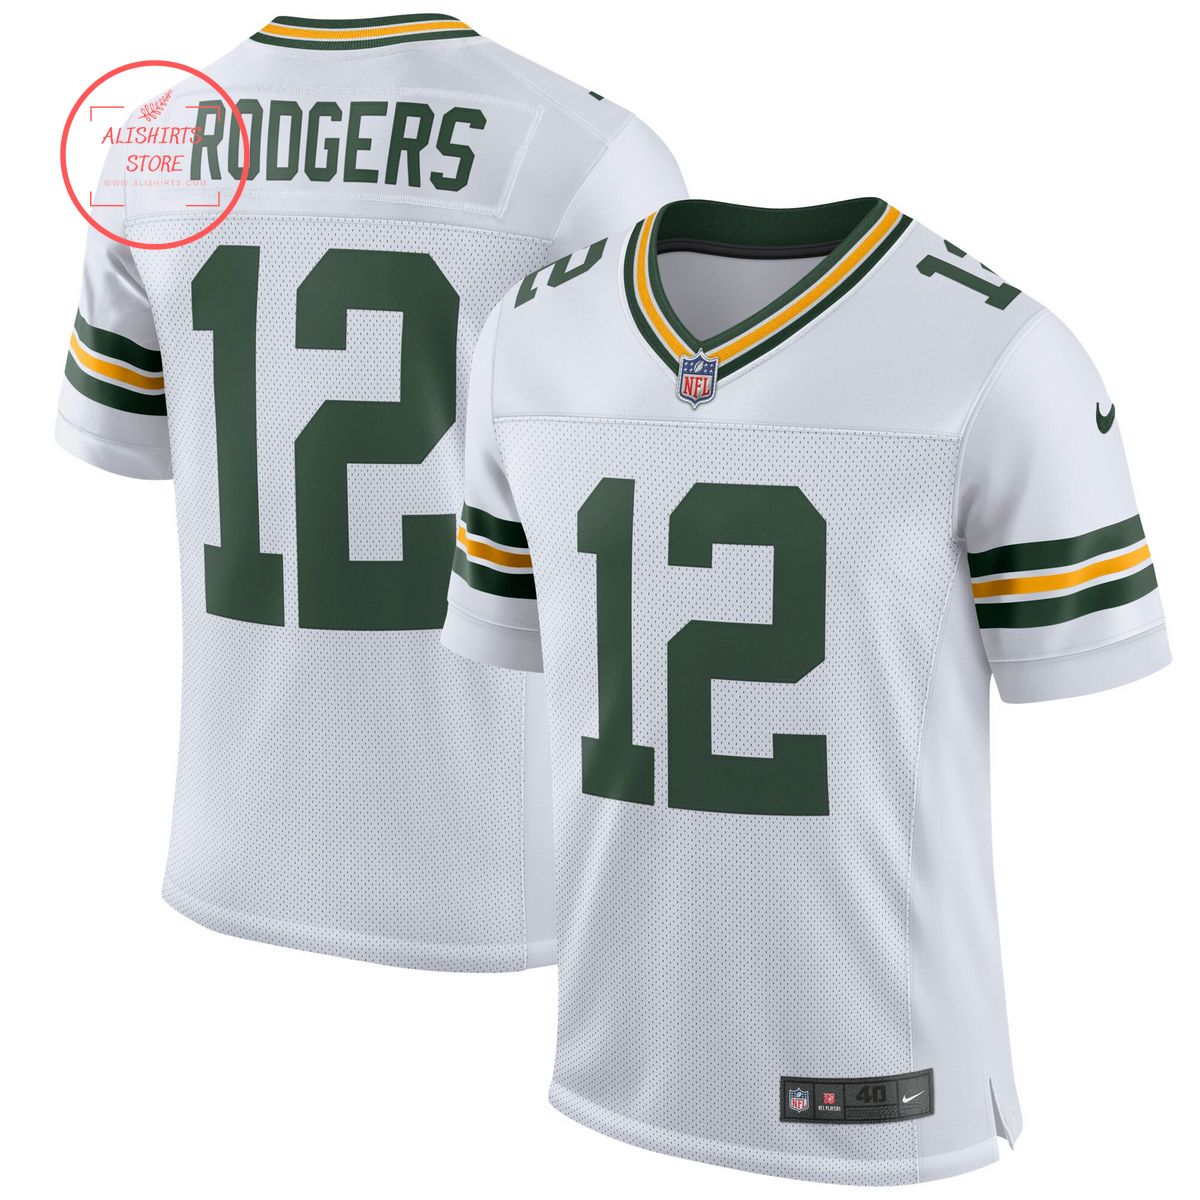 Aaron Rodgers Green Bay Packers Nike Classic Elite Player White Jersey